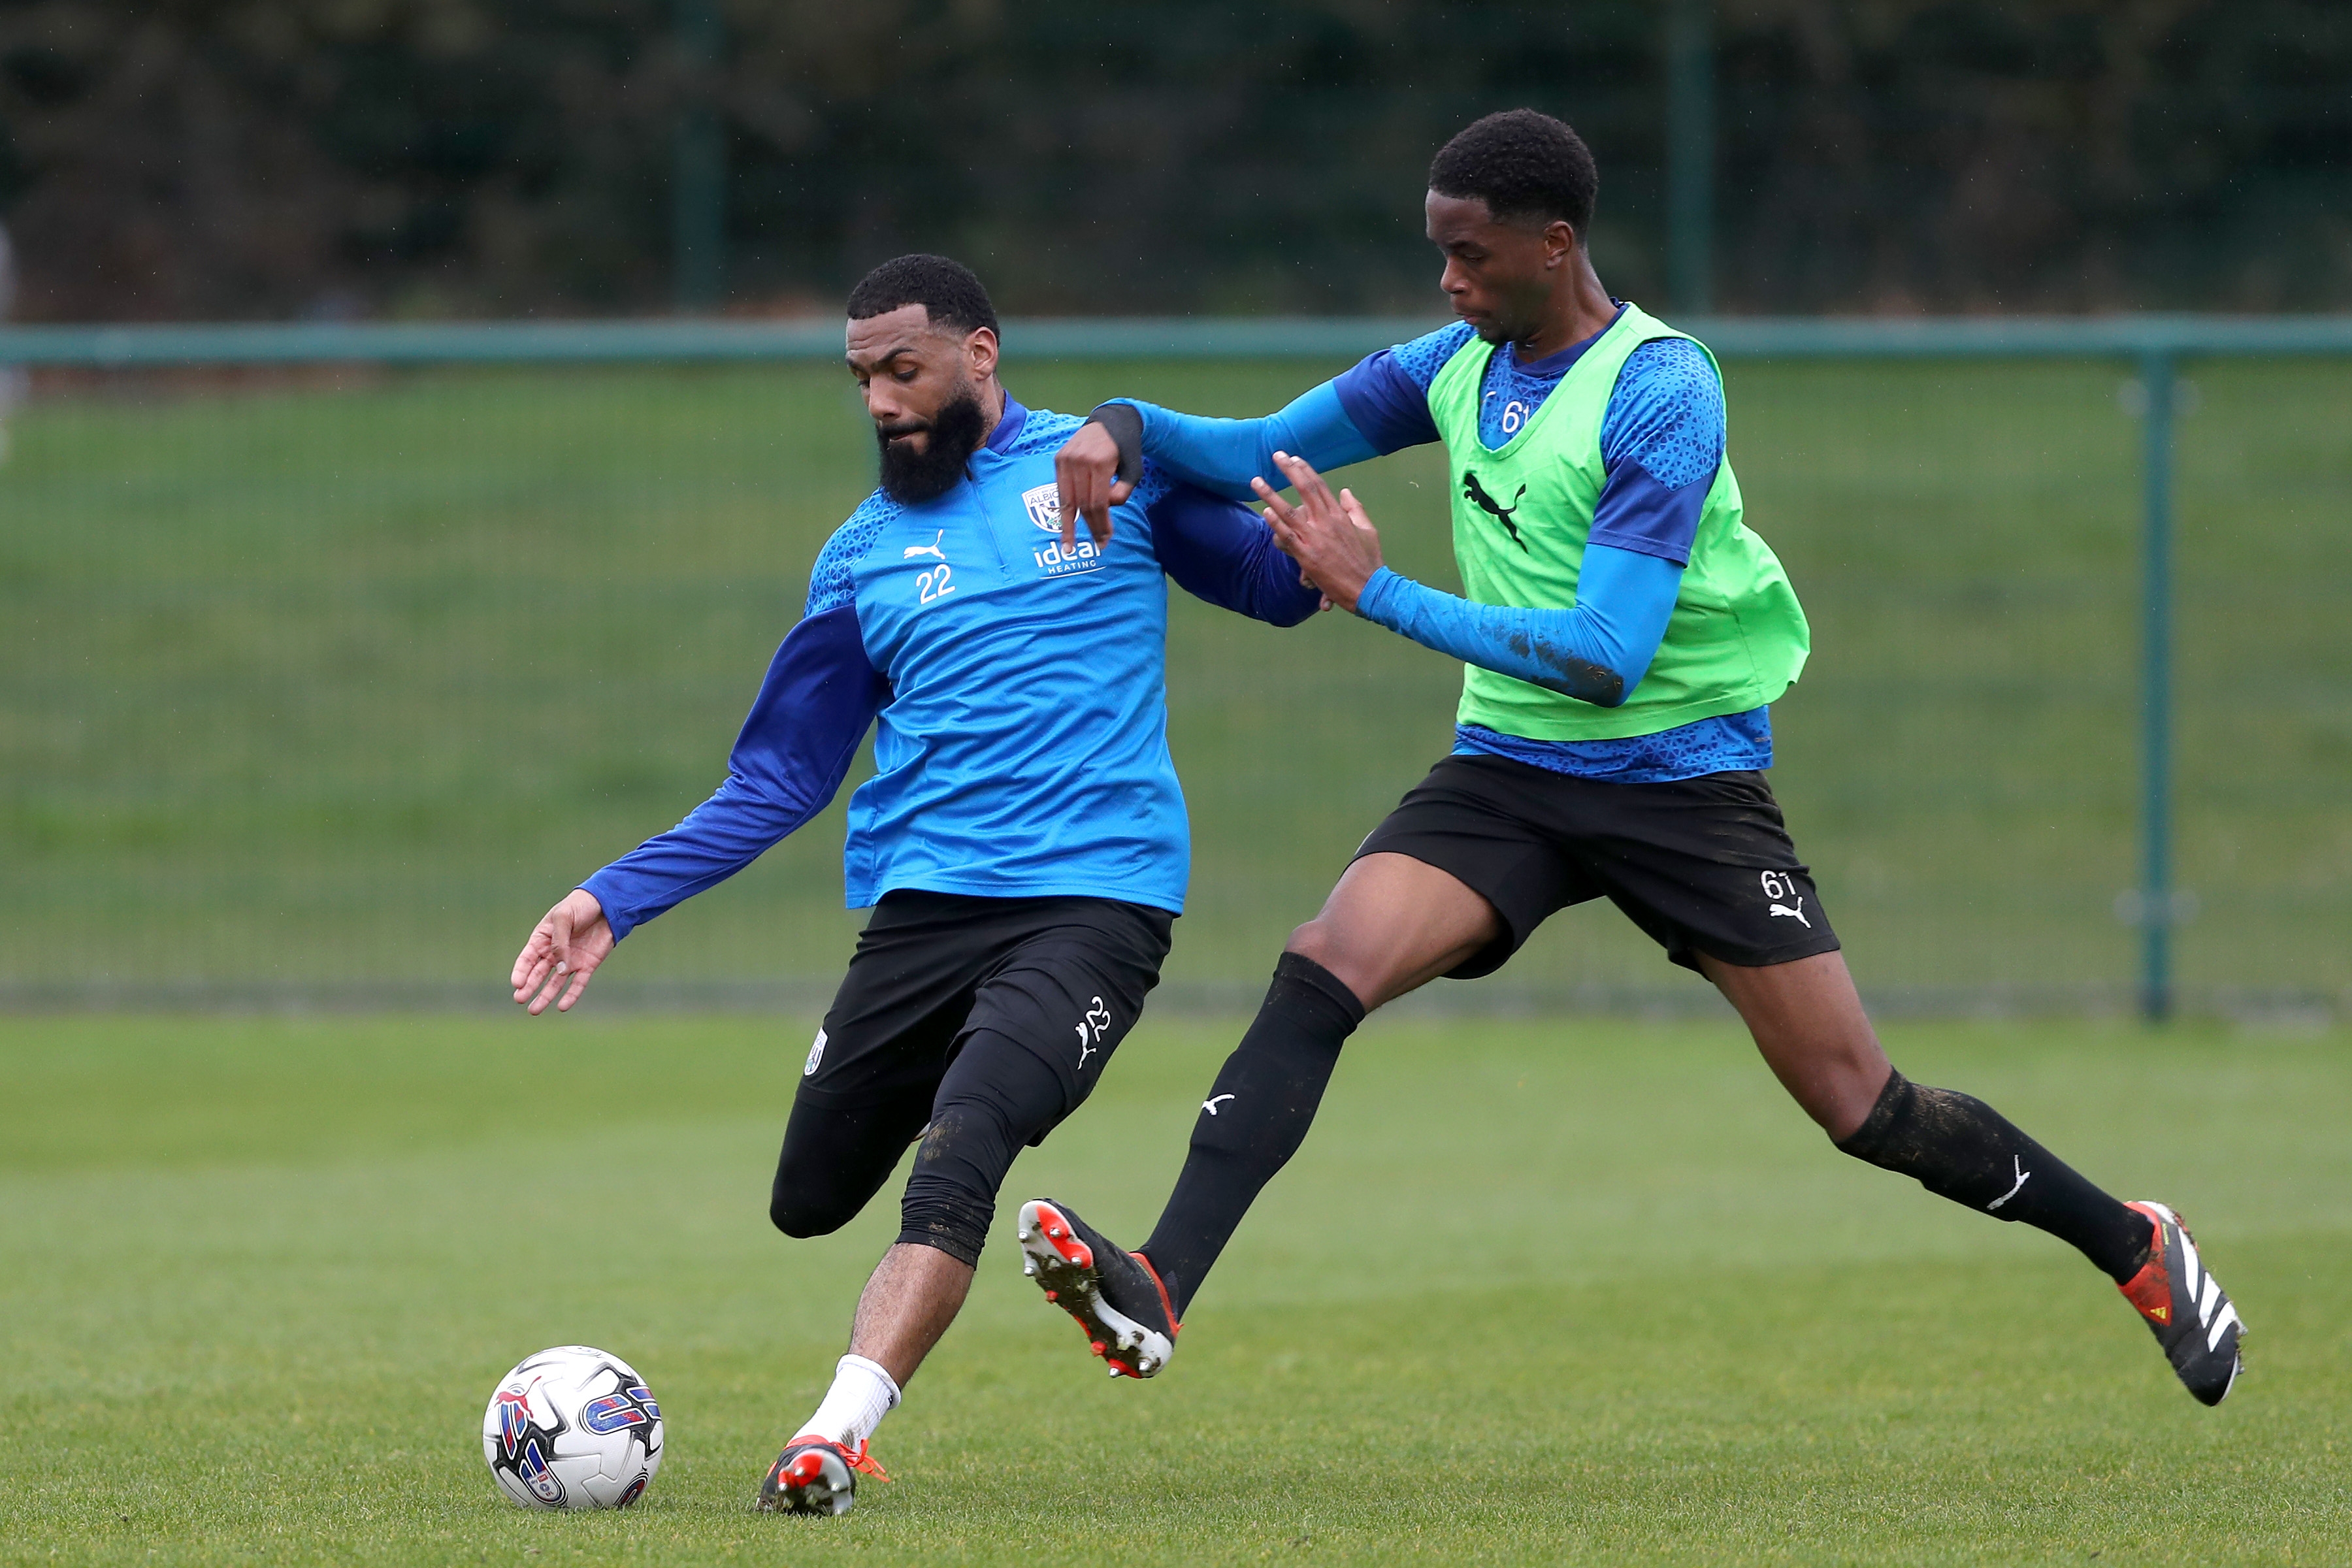 Yann M'Vila playing a pass during a training session